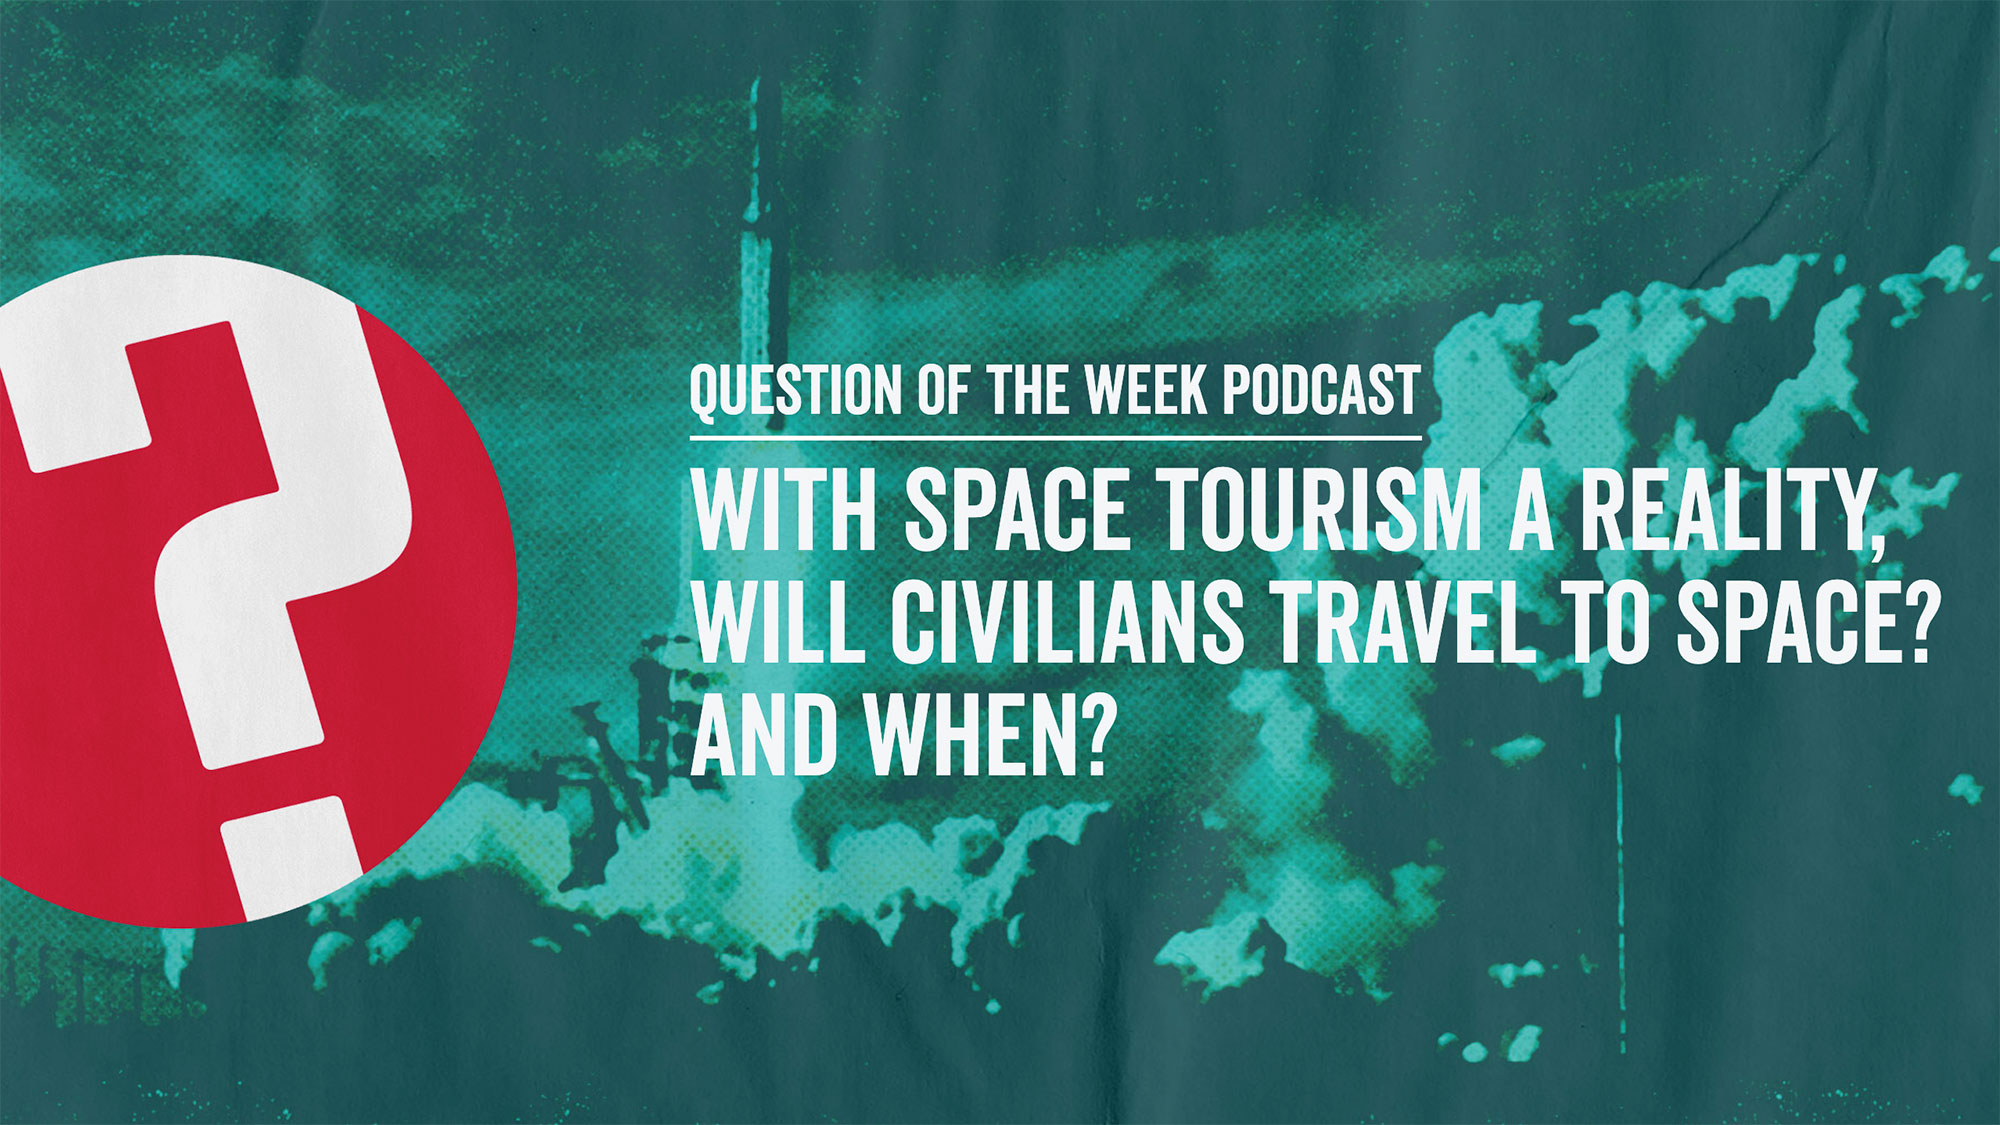 With space tourism a reality, will civilians travel to space? And when?